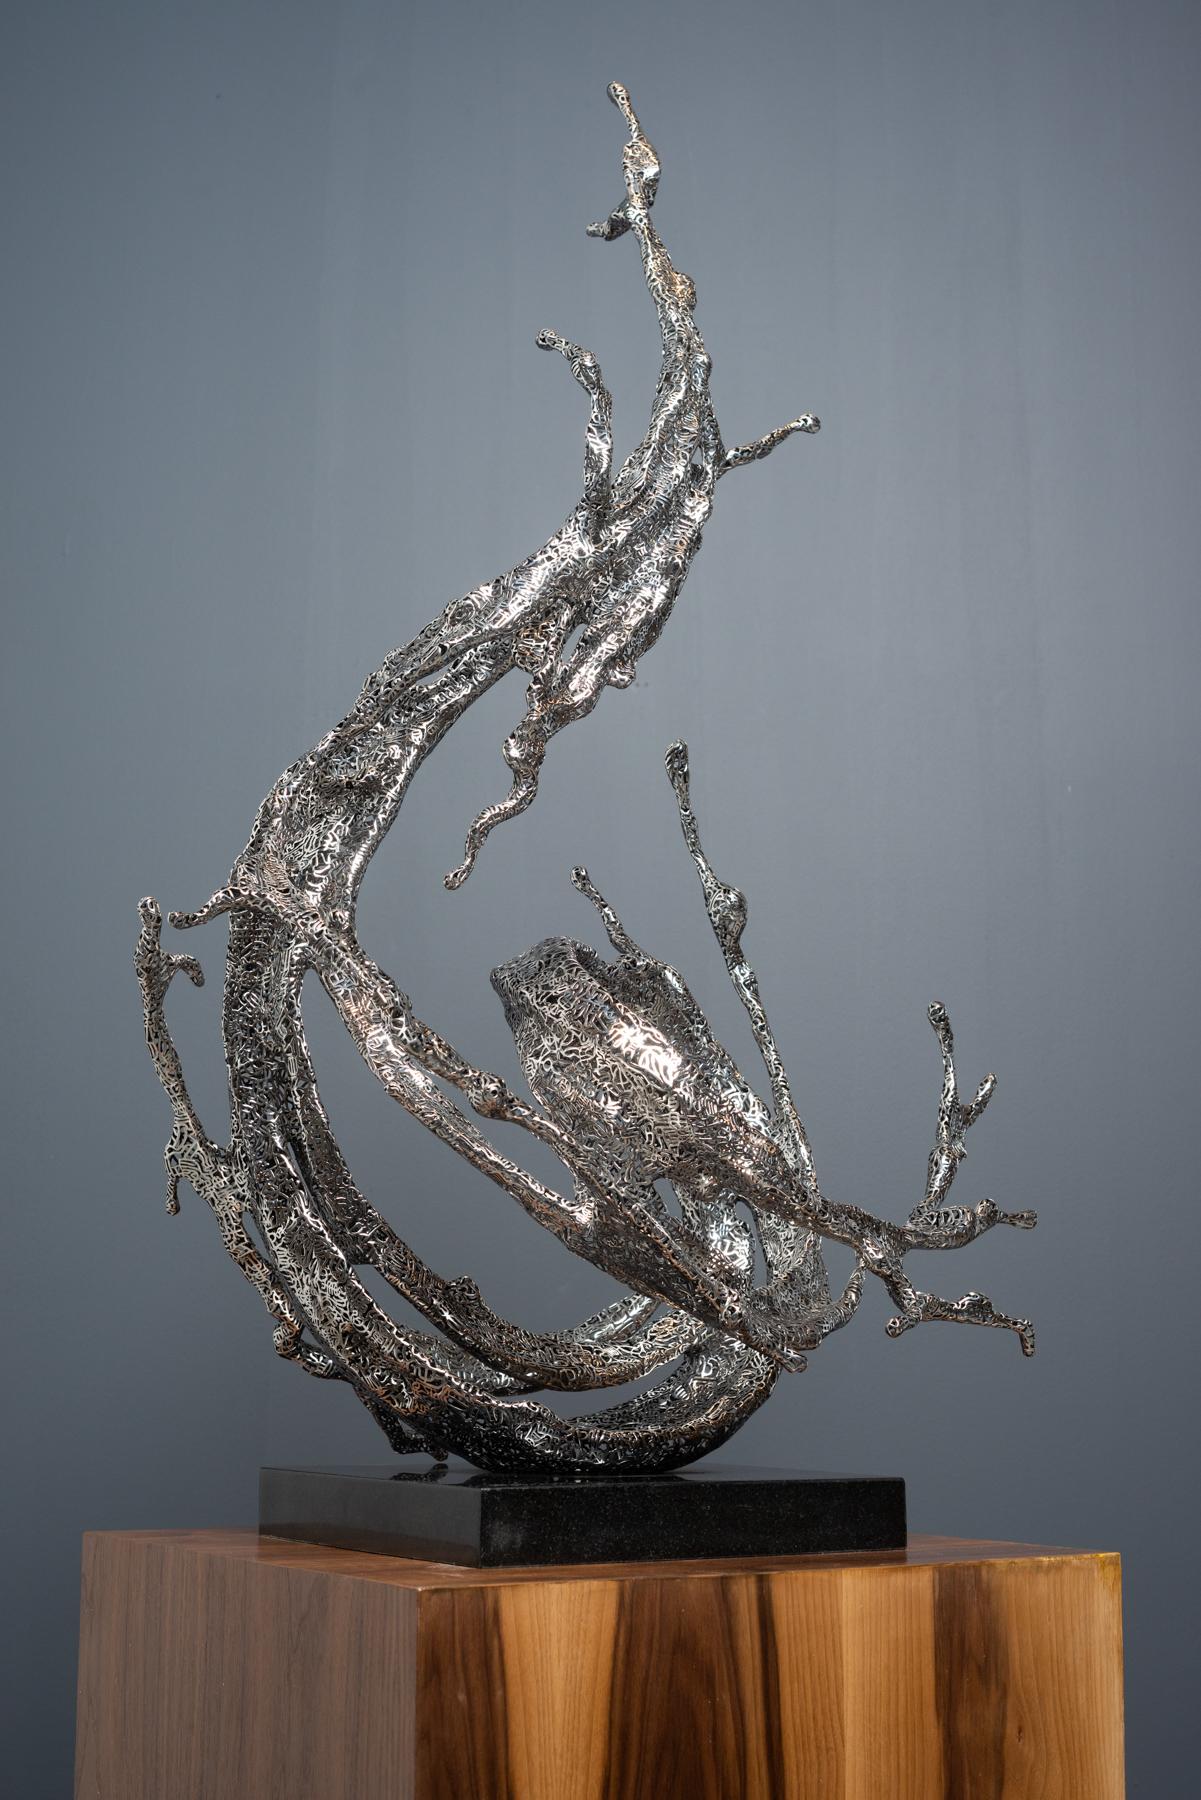 Zheng Lu Abstract Sculpture - Contemporary Chinese calligraphic stainless steel sculpture